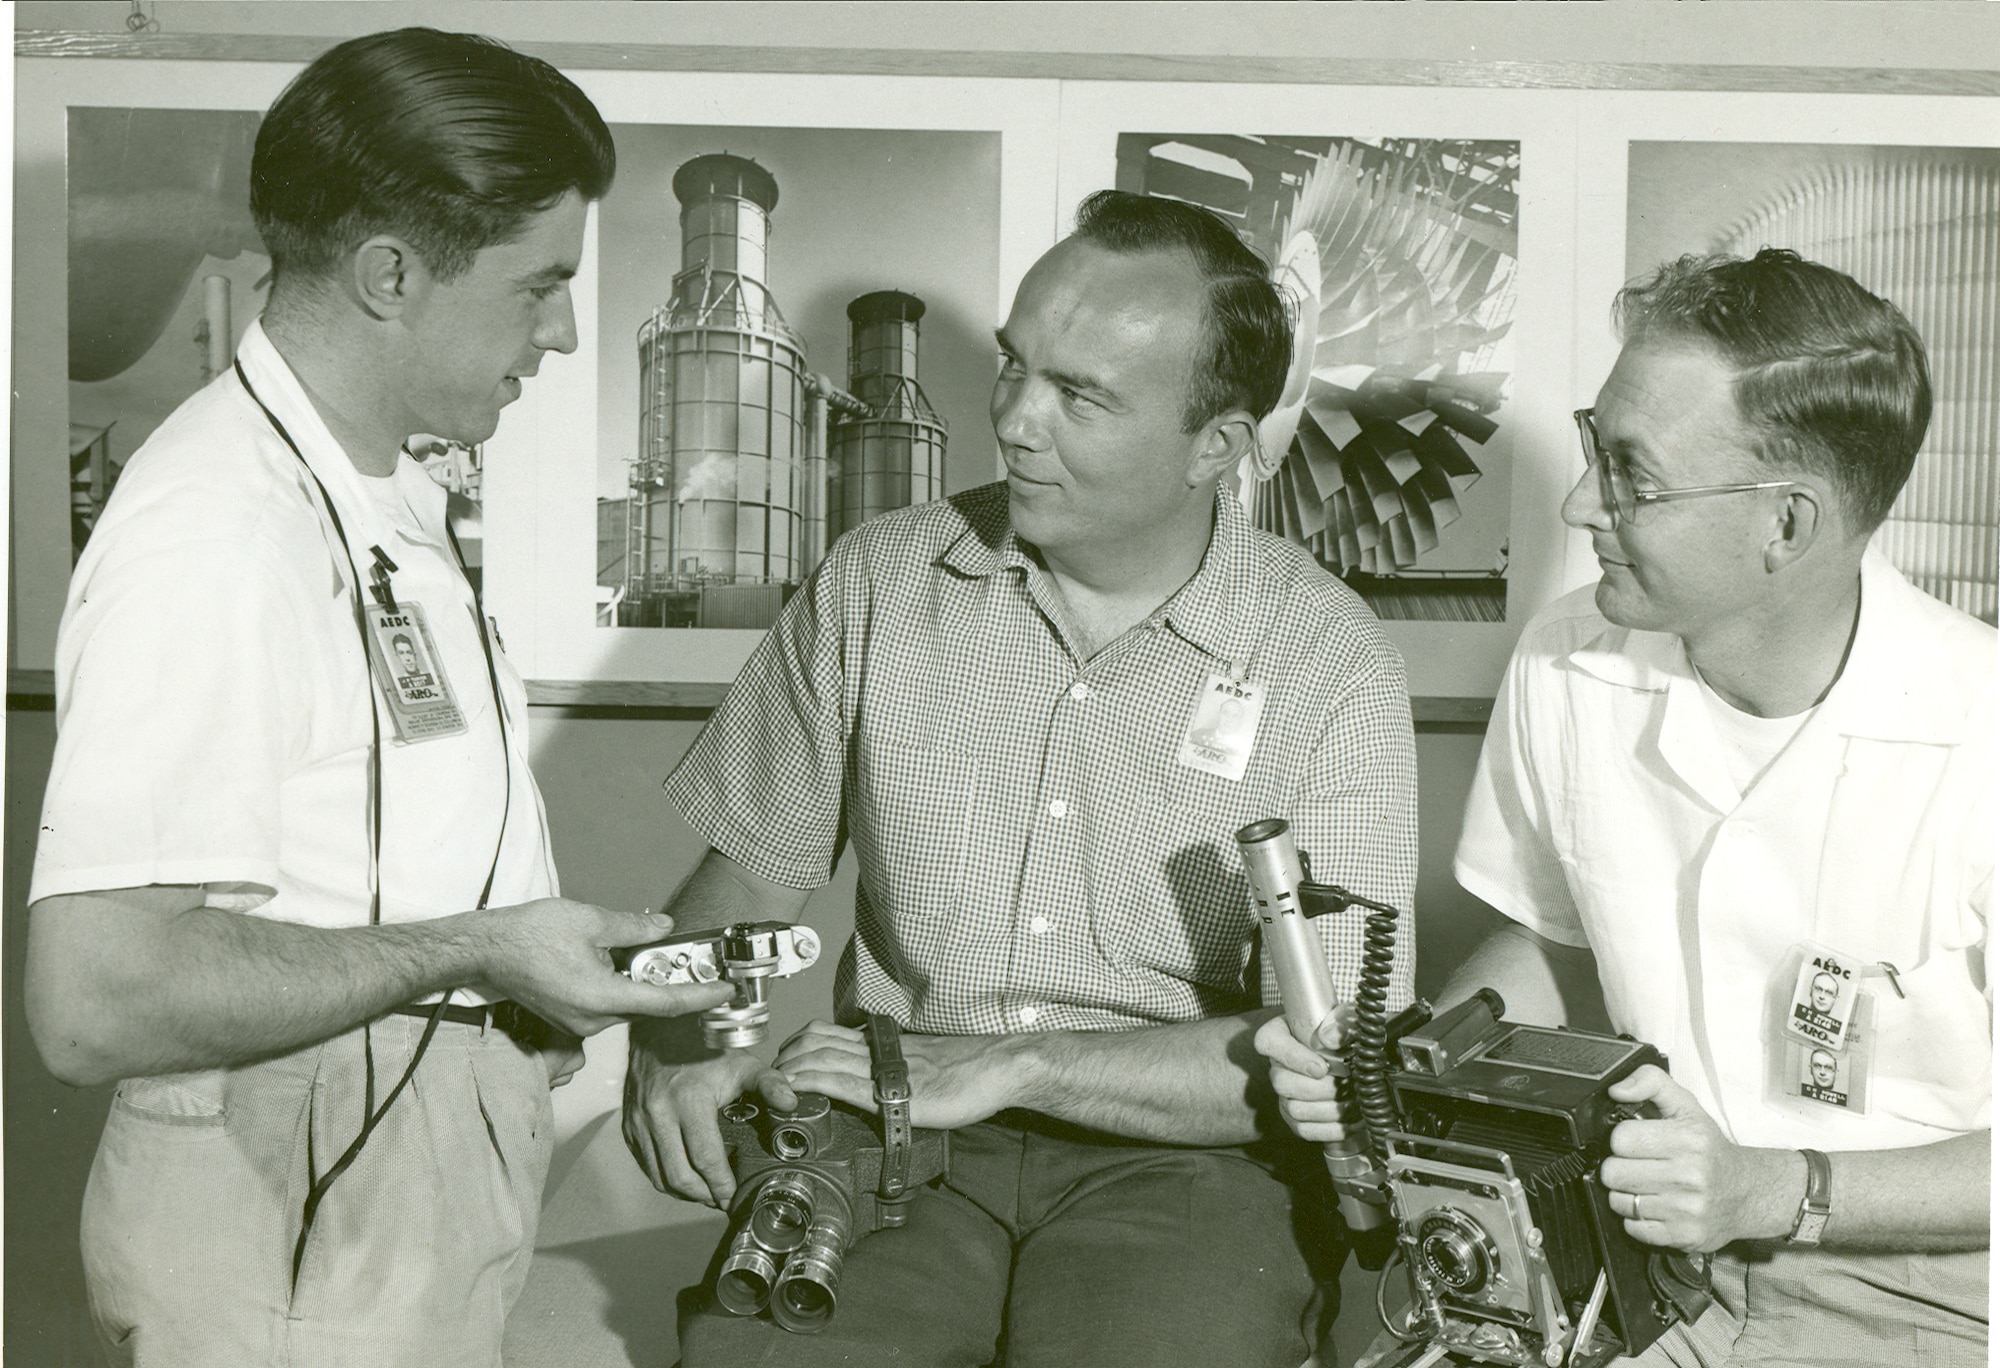 By 1956 Phil Tarver was joined by R. Pierson Smith and Charlie Powell who helped him with photographing the important events and people associated with the frenetic pace of flight simulation testing at AEDC. The team captured newsworthy and often iconic images on film, both photographic stills and movies. (AEDC historical photo)